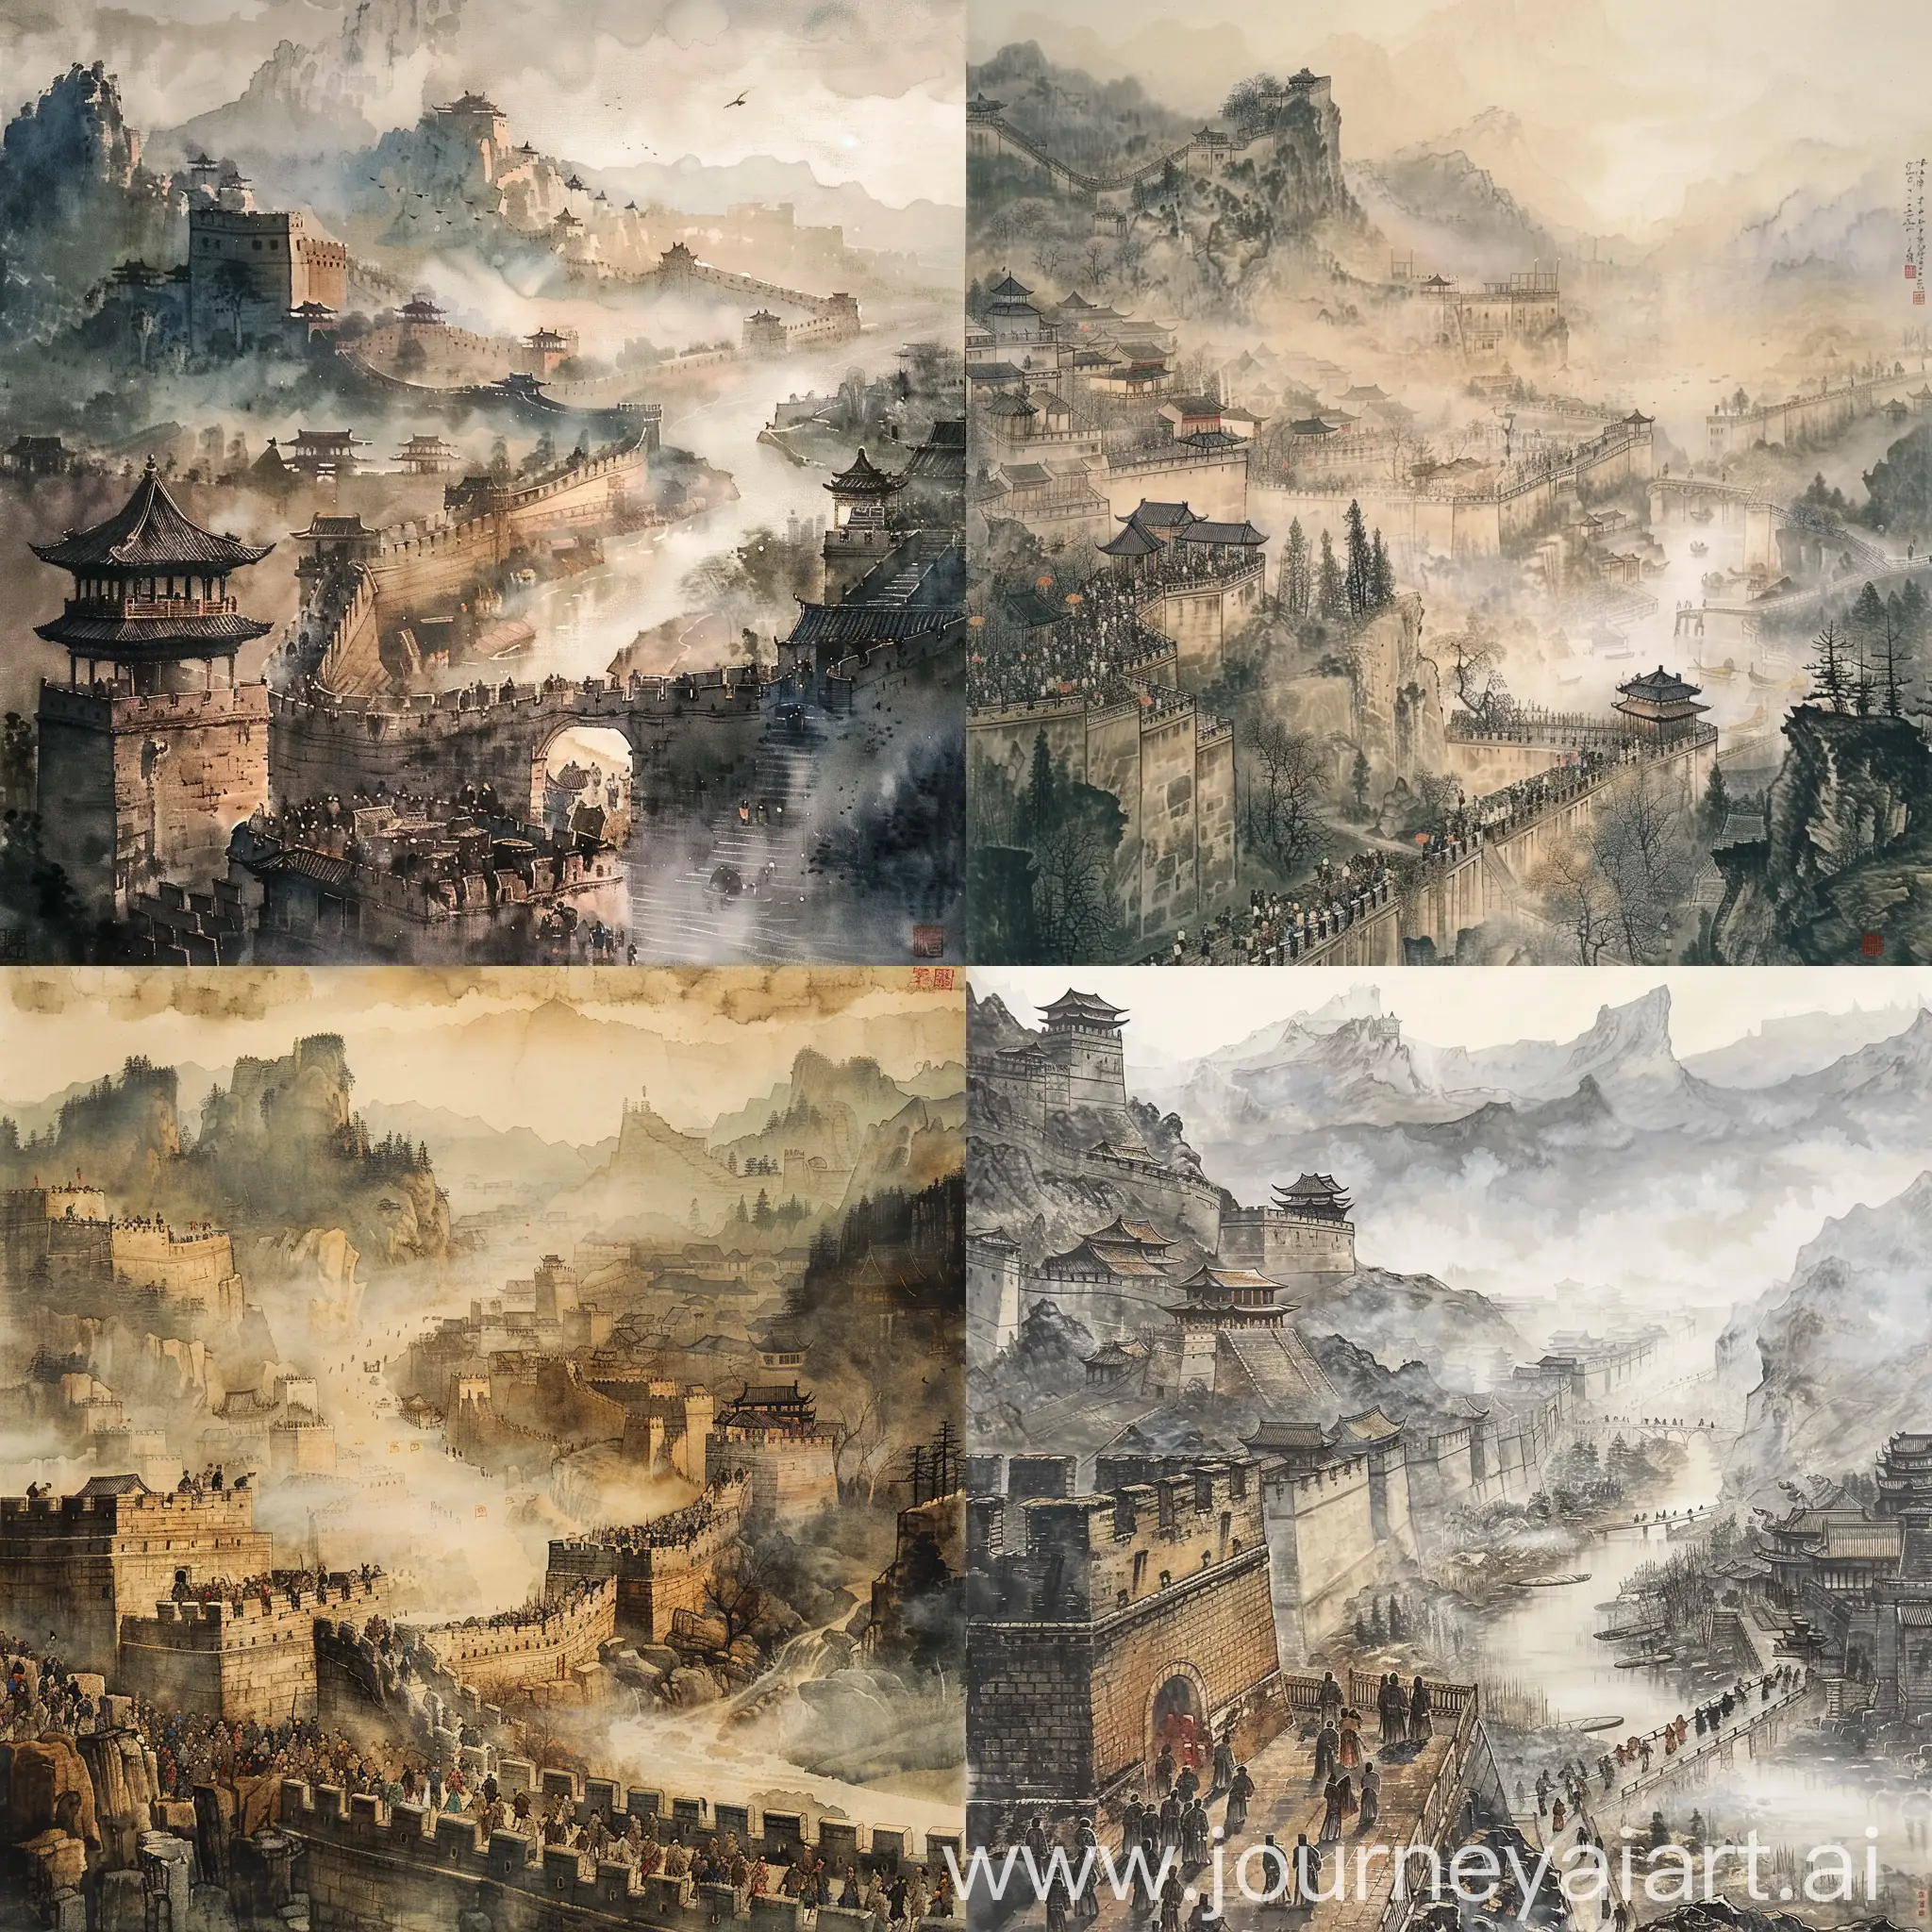 Ancient-City-Walls-Crowded-Feudal-Architecture-in-Misty-Chinese-Landscape